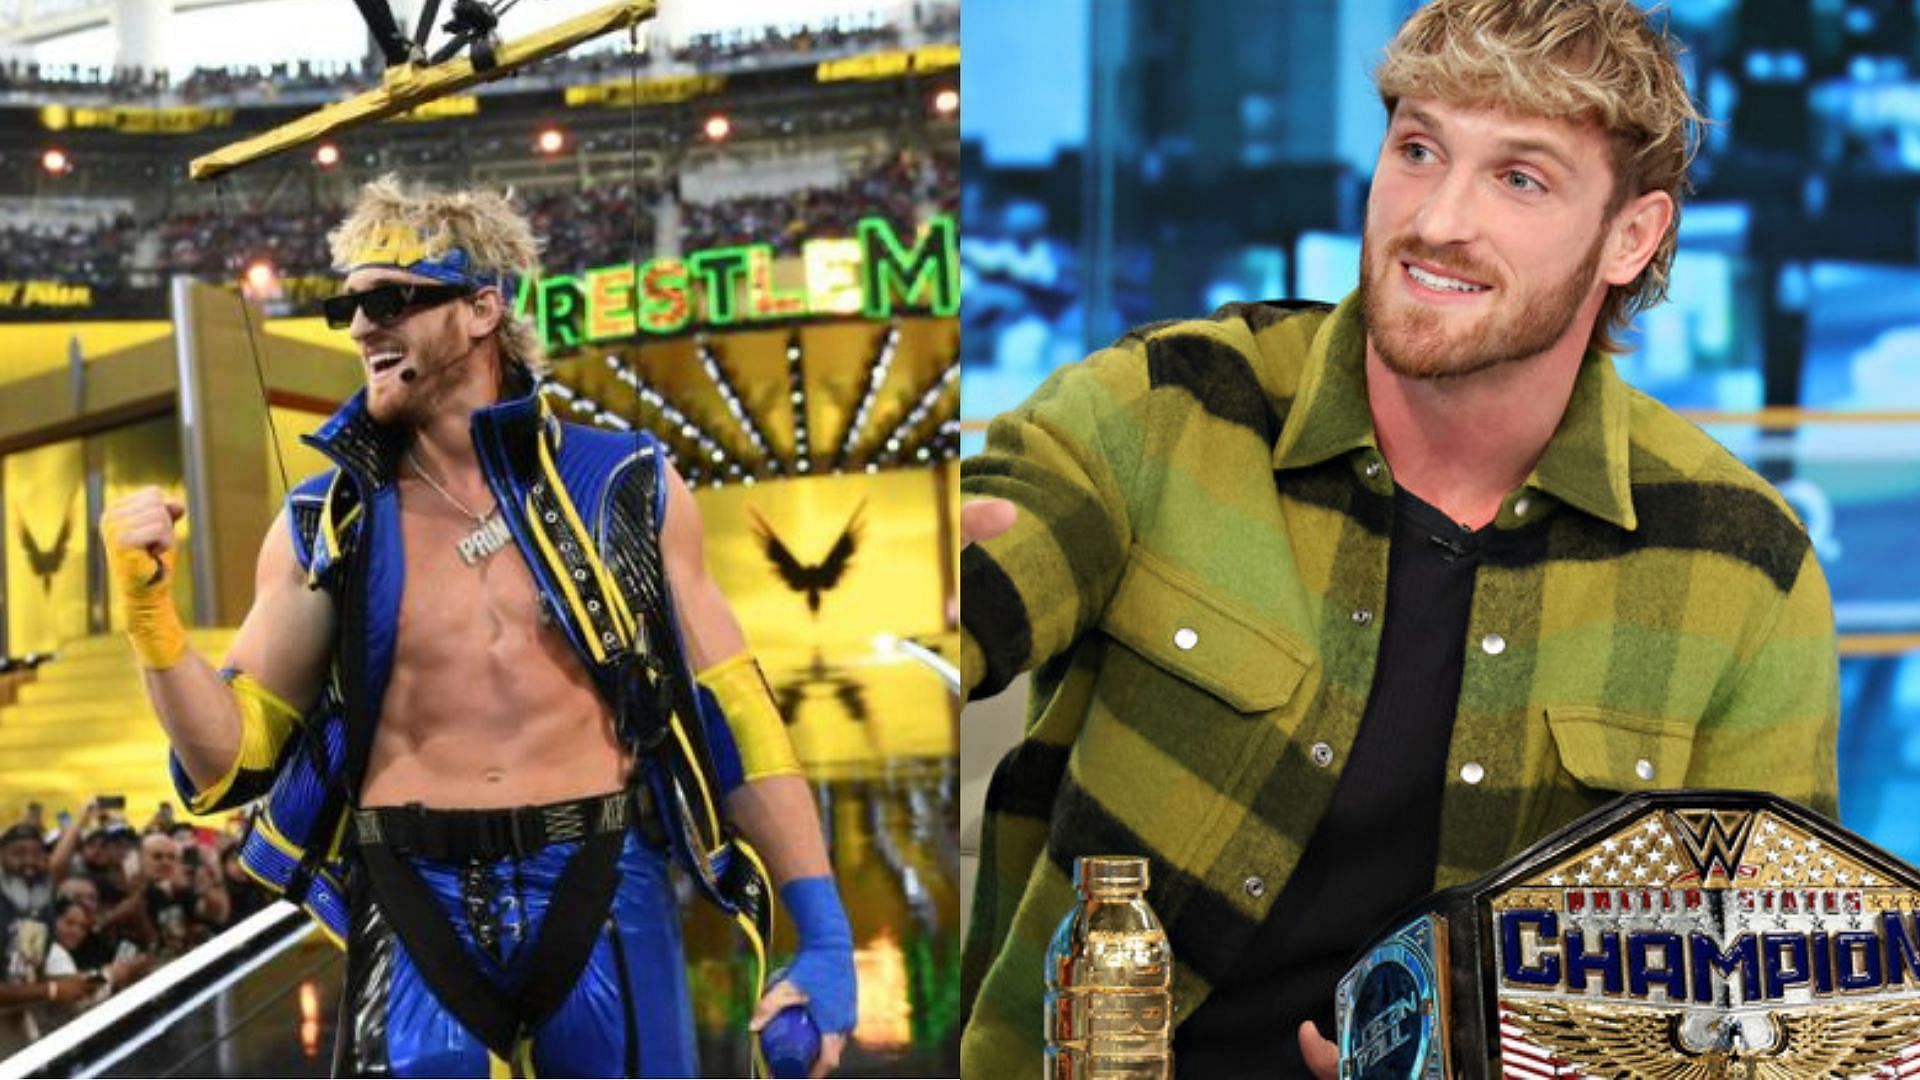 Logan Paul is the current United States Champion